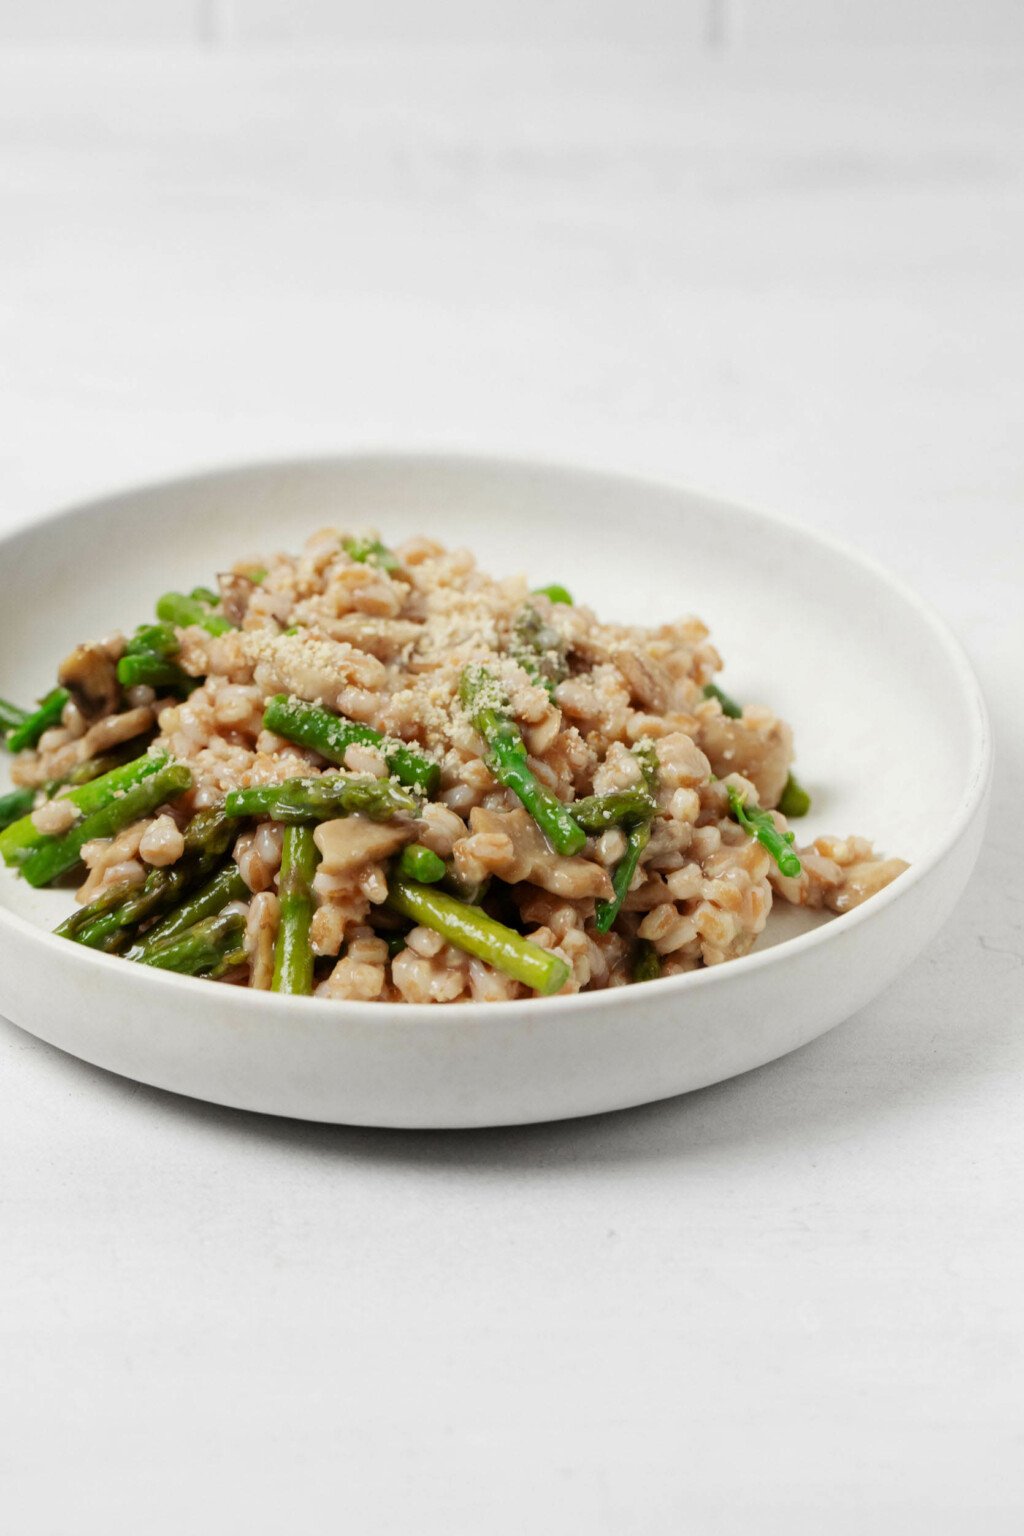 A low, round white bowl holds a whole grain dish with bright green, chopped asparagus spears.